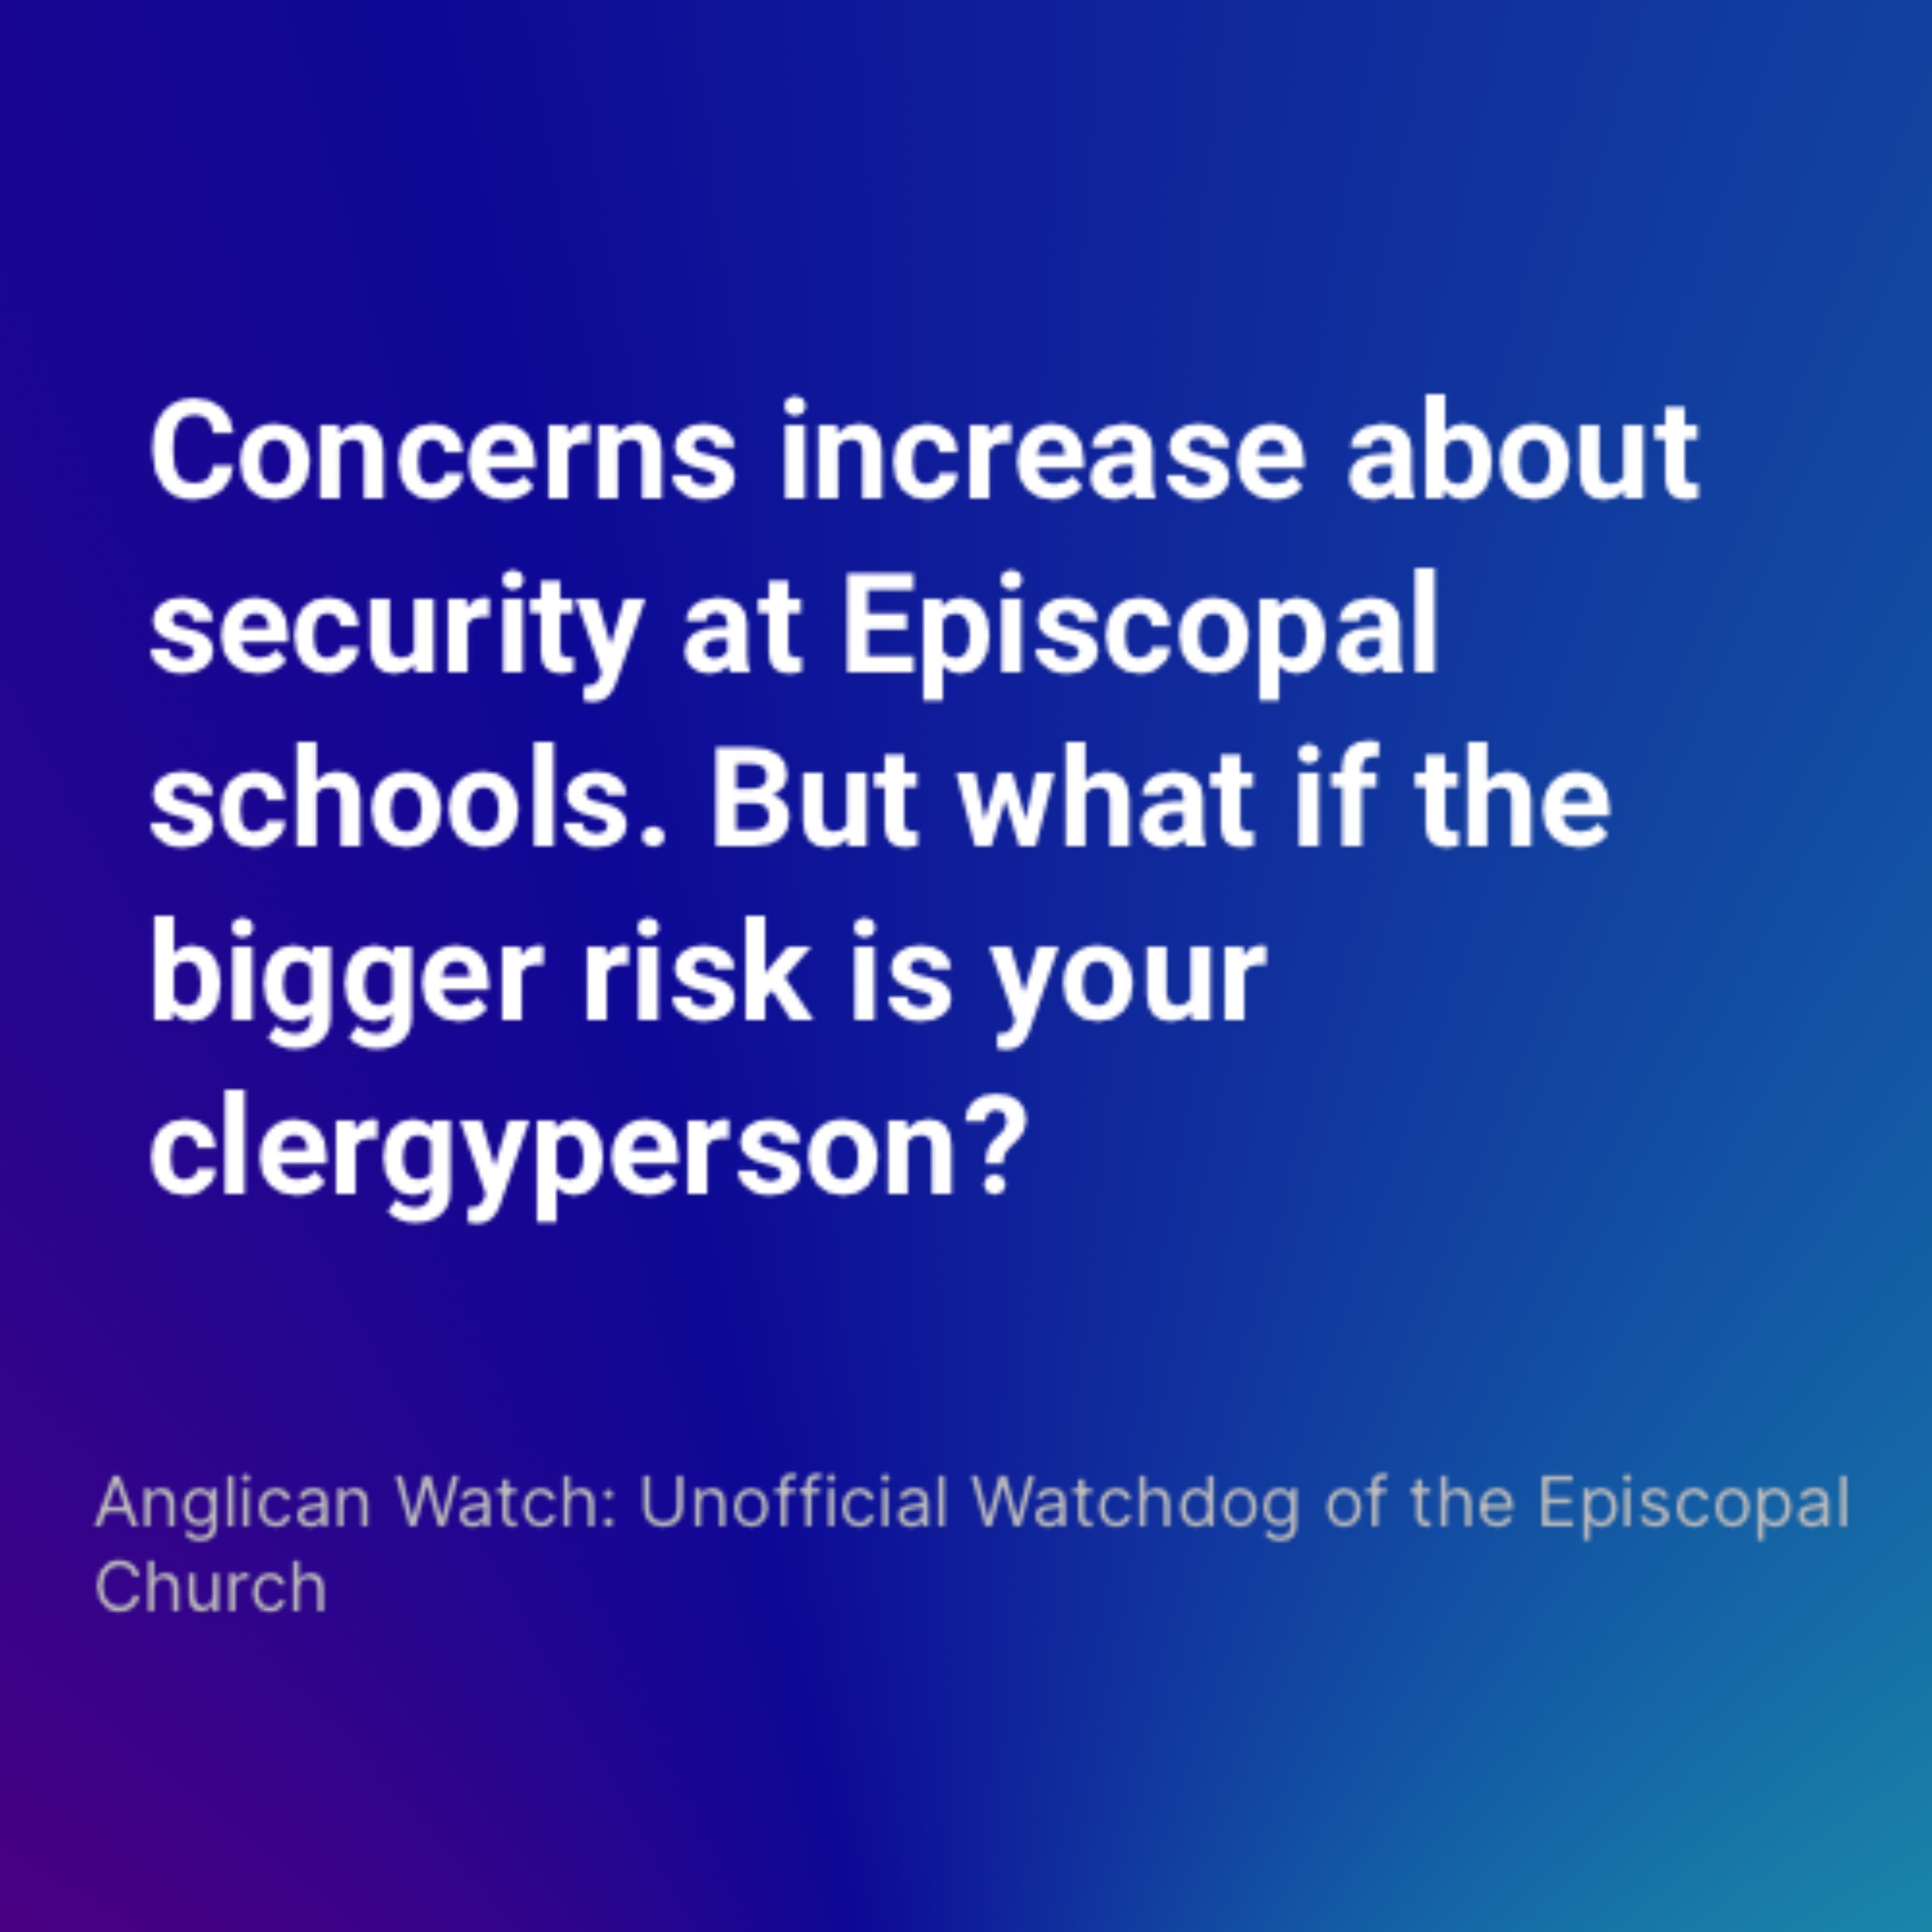 Concerns increase about security at Episcopal schools. But what if the bigger risk is your clergyperson?